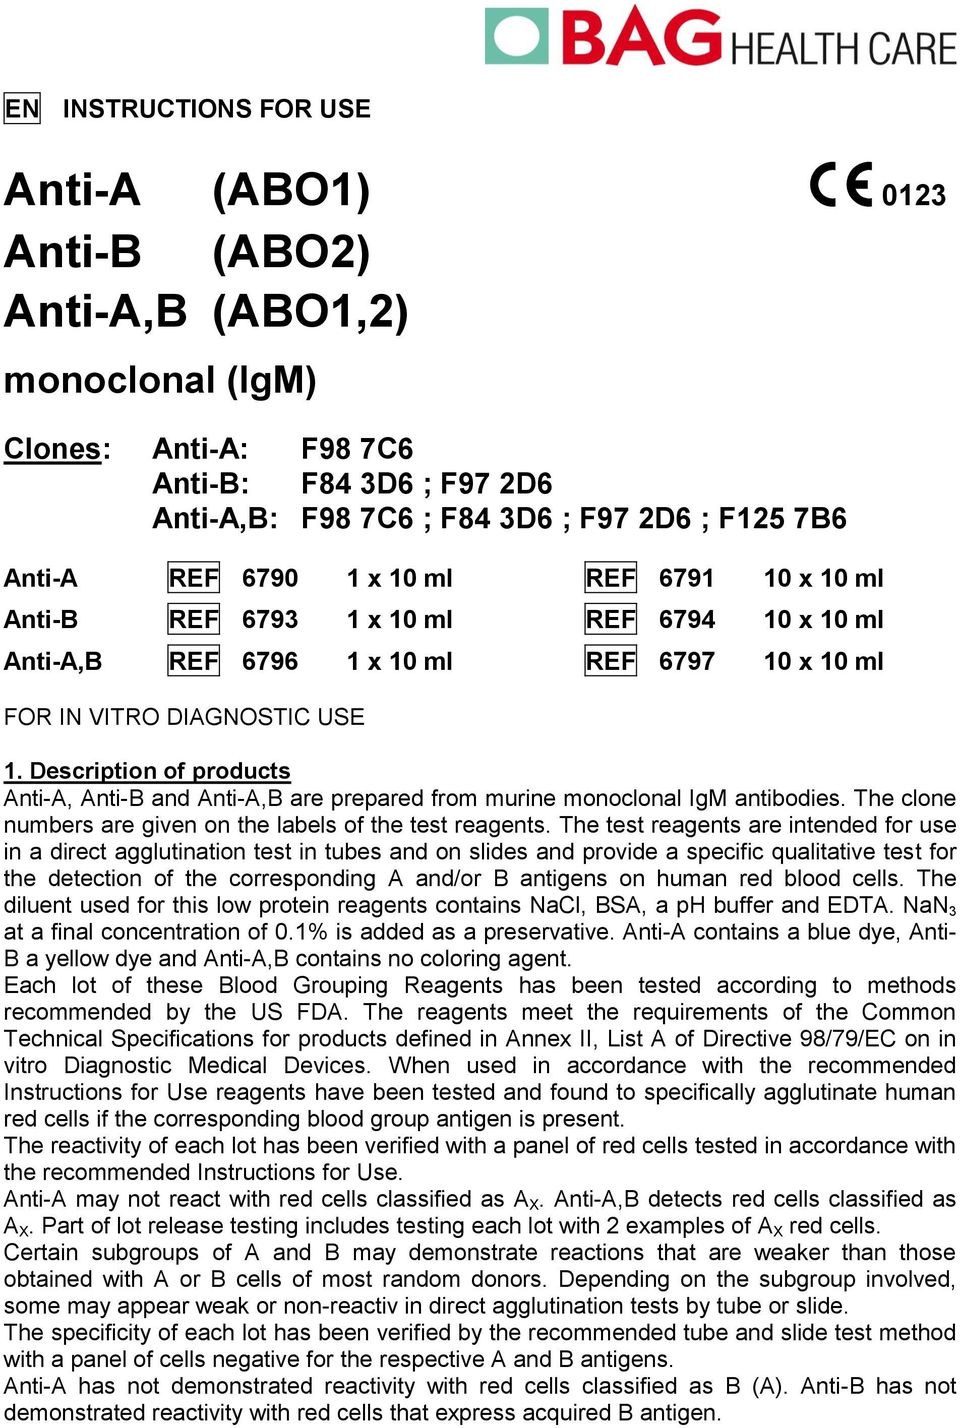 Description of products AntiA, AntiB and AntiA,B are prepared from murine monoclonal IgM antibodies. The clone numbers are given on the labels of the test reagents.